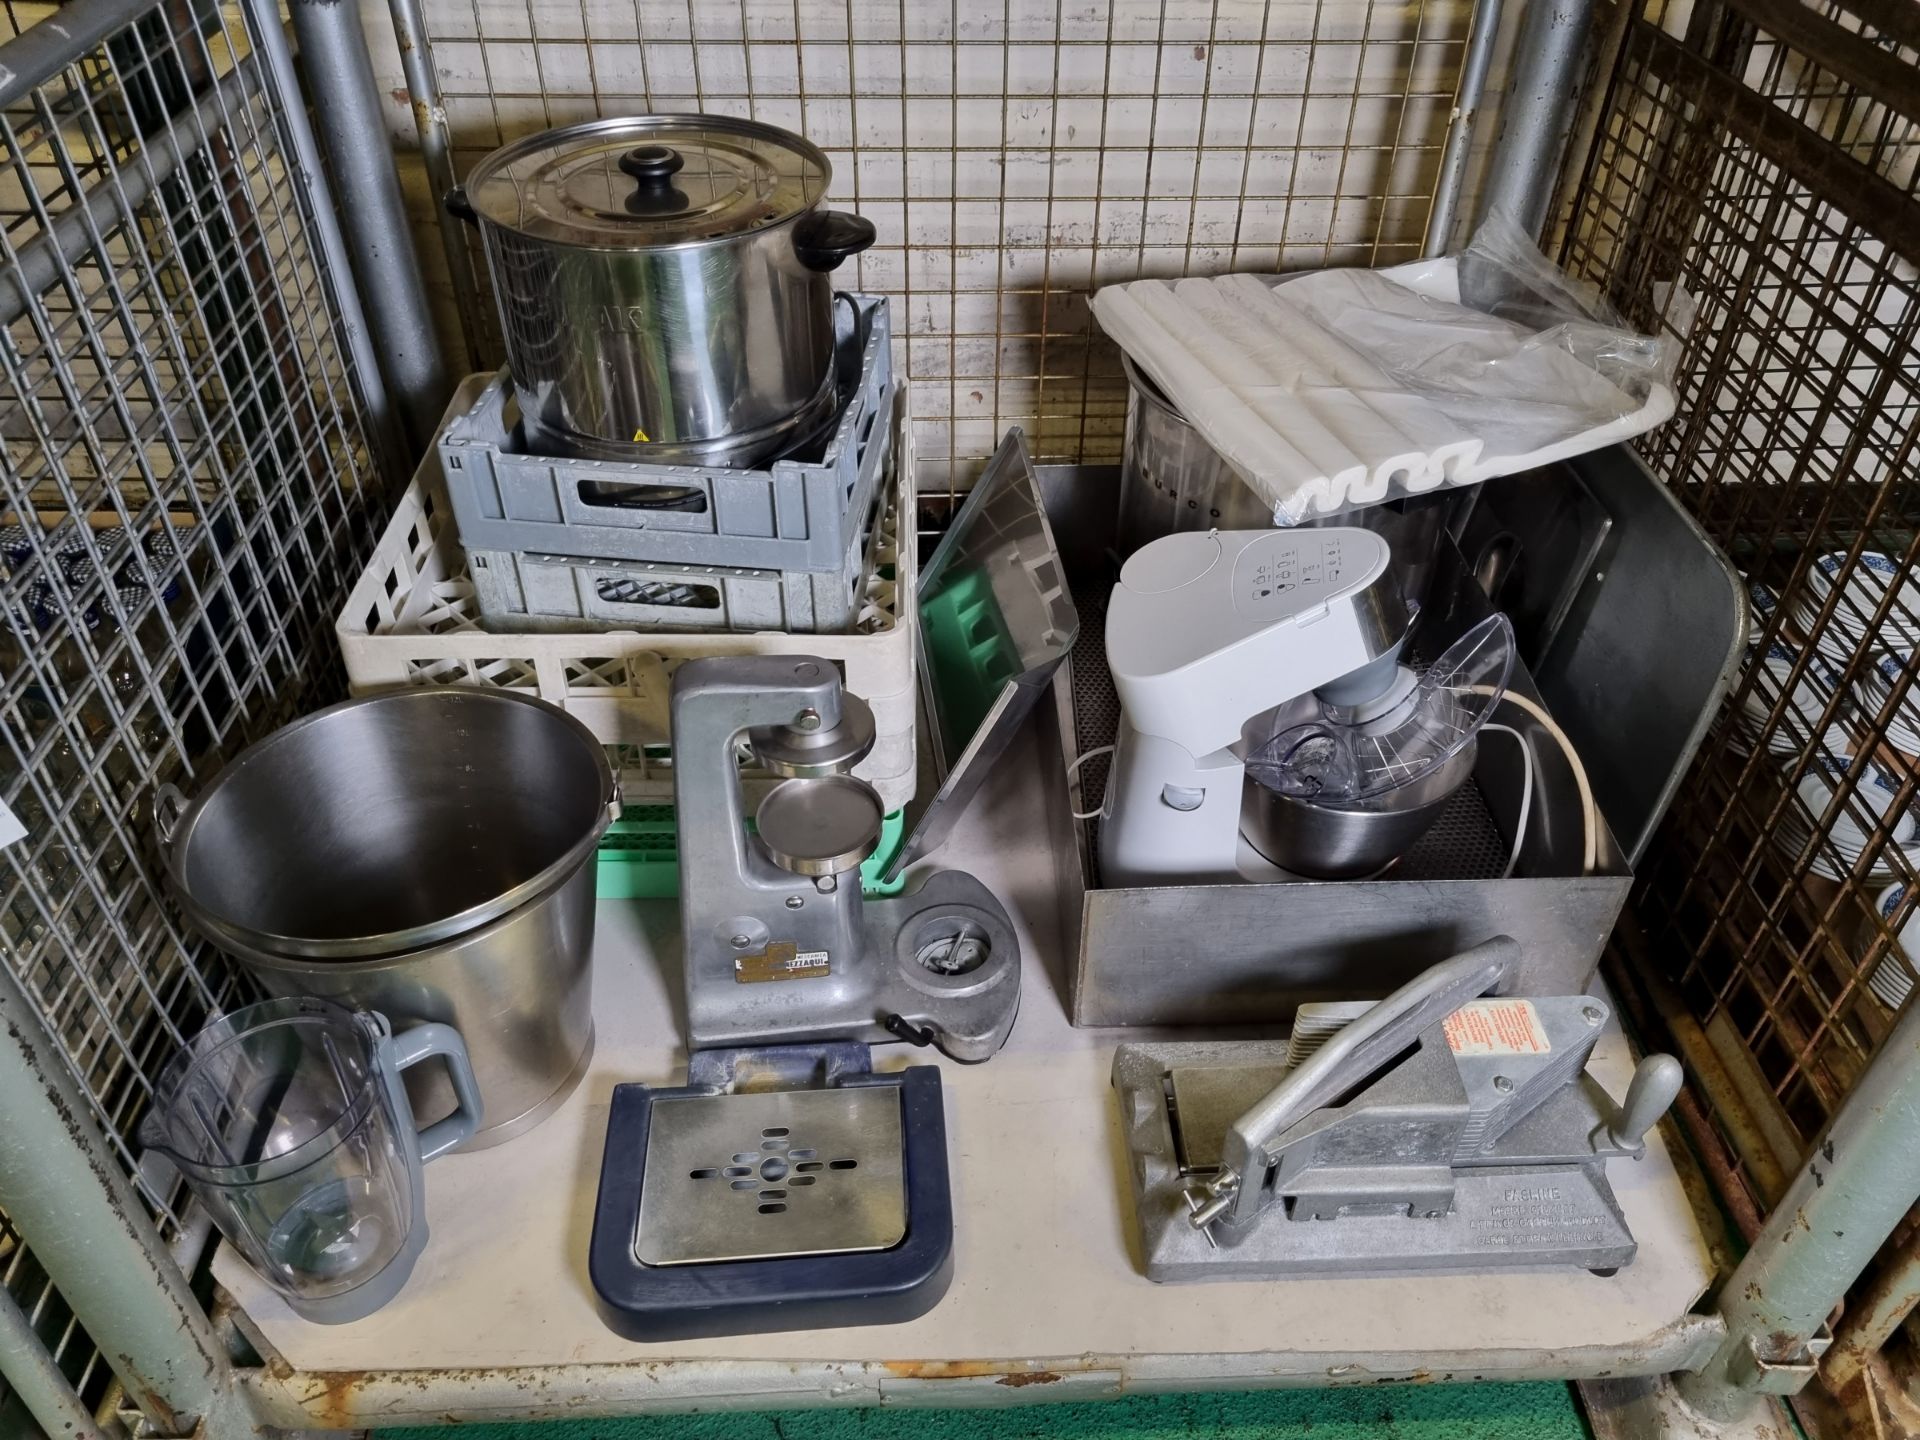 Catering equipment - dishwasher trays, food steamers, small mixer, tomato slicer, blender jug - Image 2 of 7